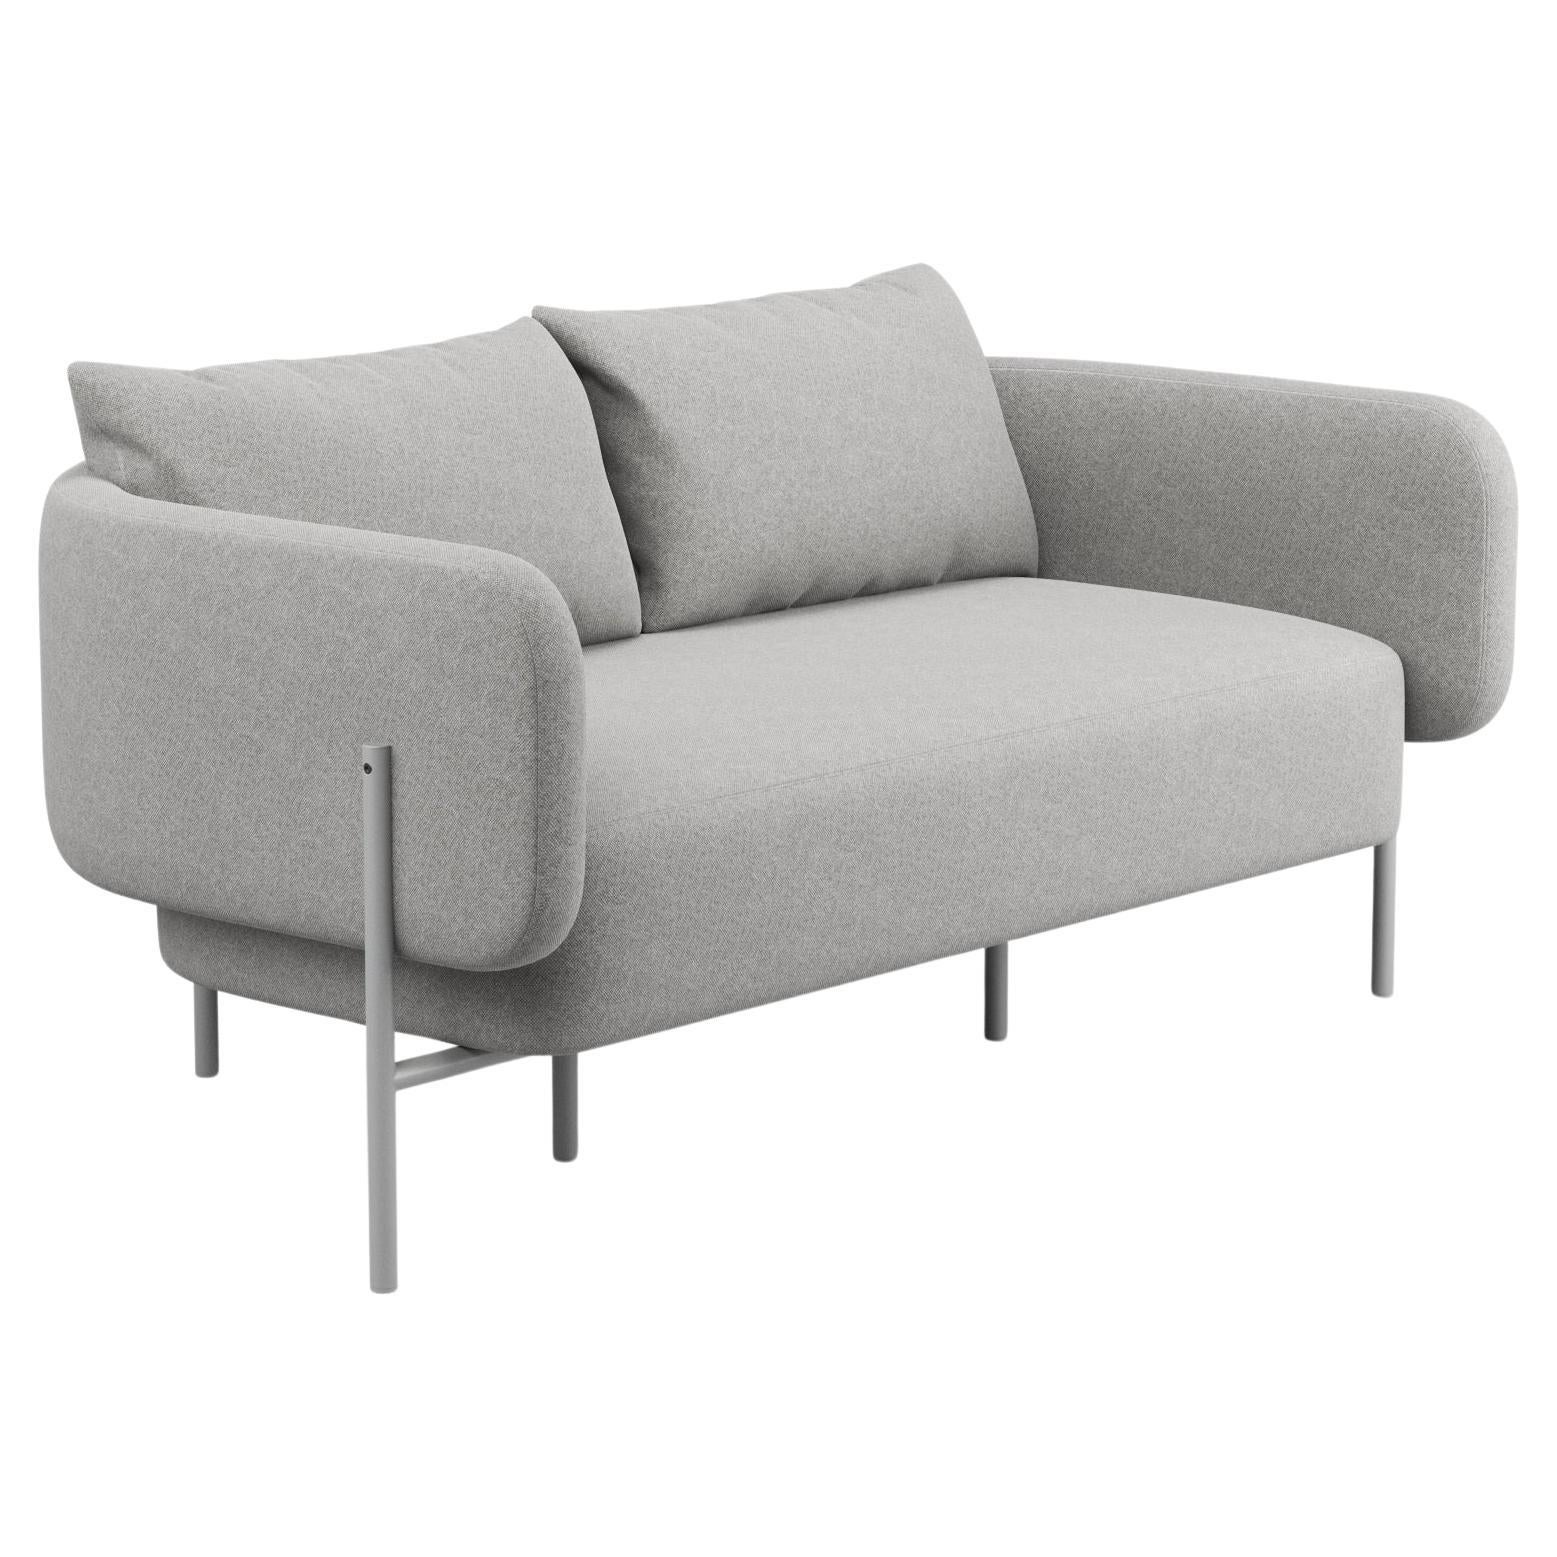 Hayche Abrazo 2 Seater Sofa - Grey, UK, Made to Order For Sale